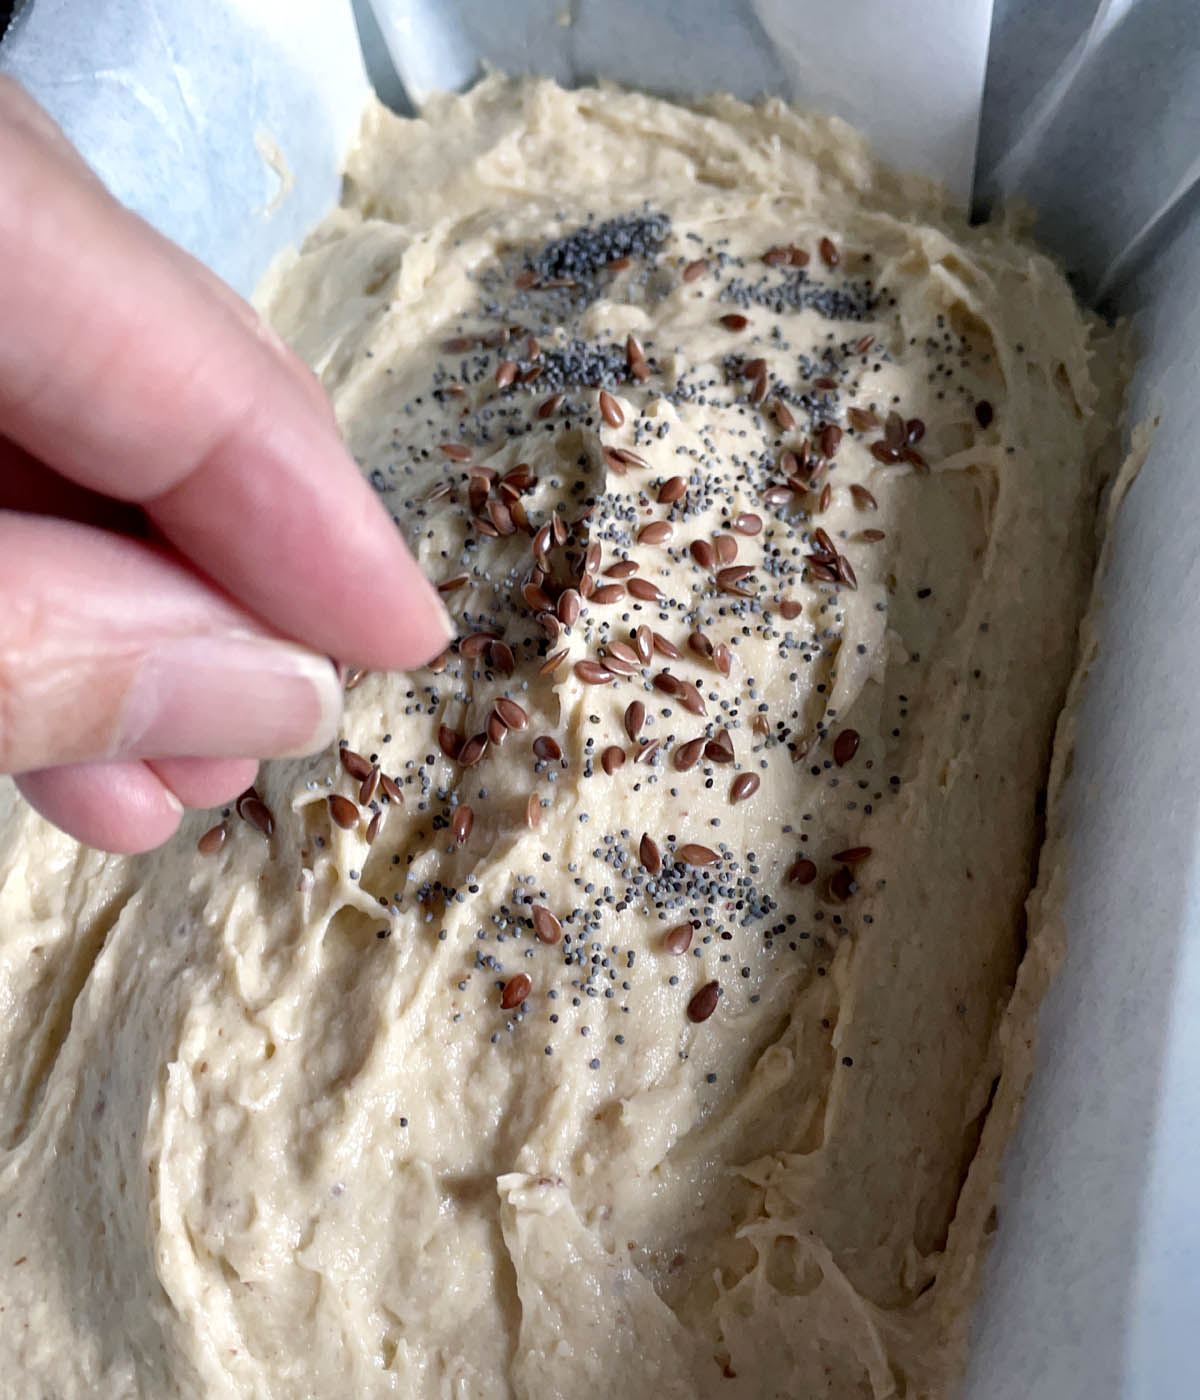 A hand sprinkling brown flax seeds and grey poppy seeds over dough in a bread pan.